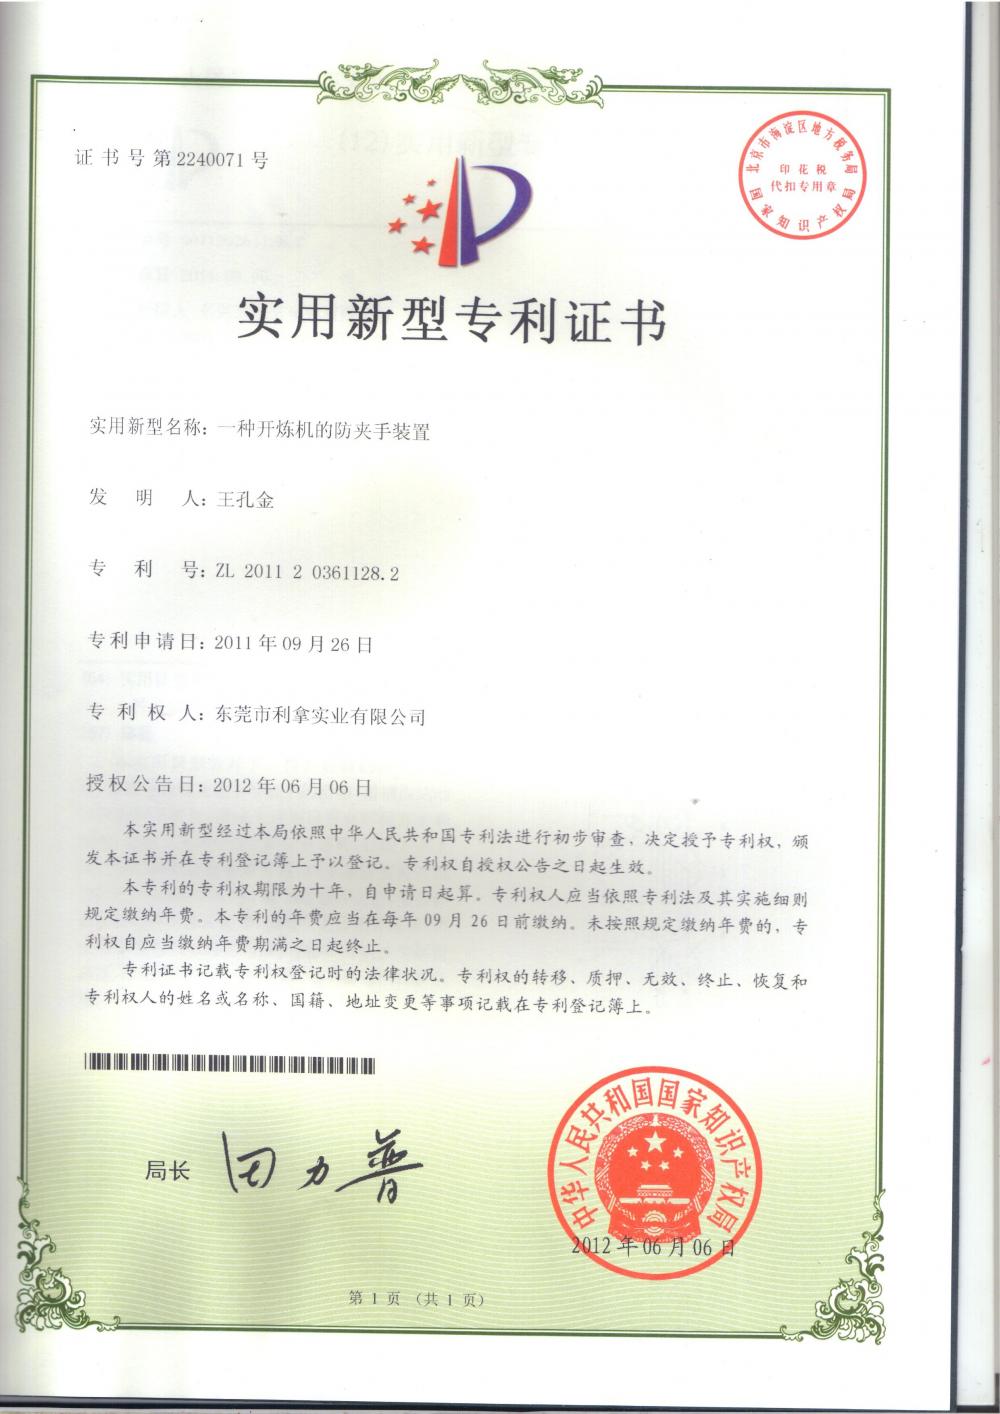 National Patent 6